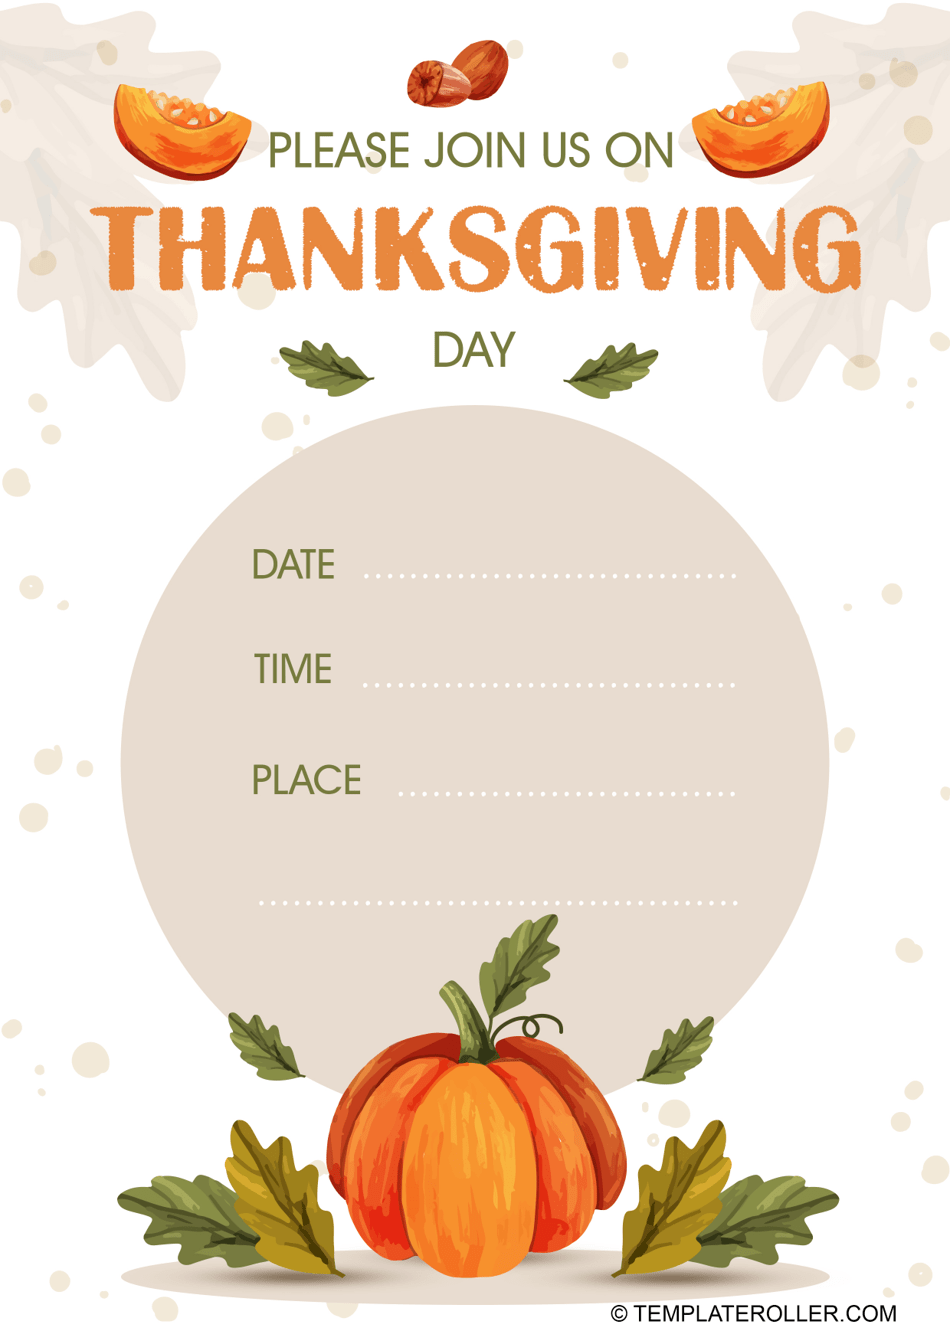 Thanksgiving Invitation Template with a Pumpkin